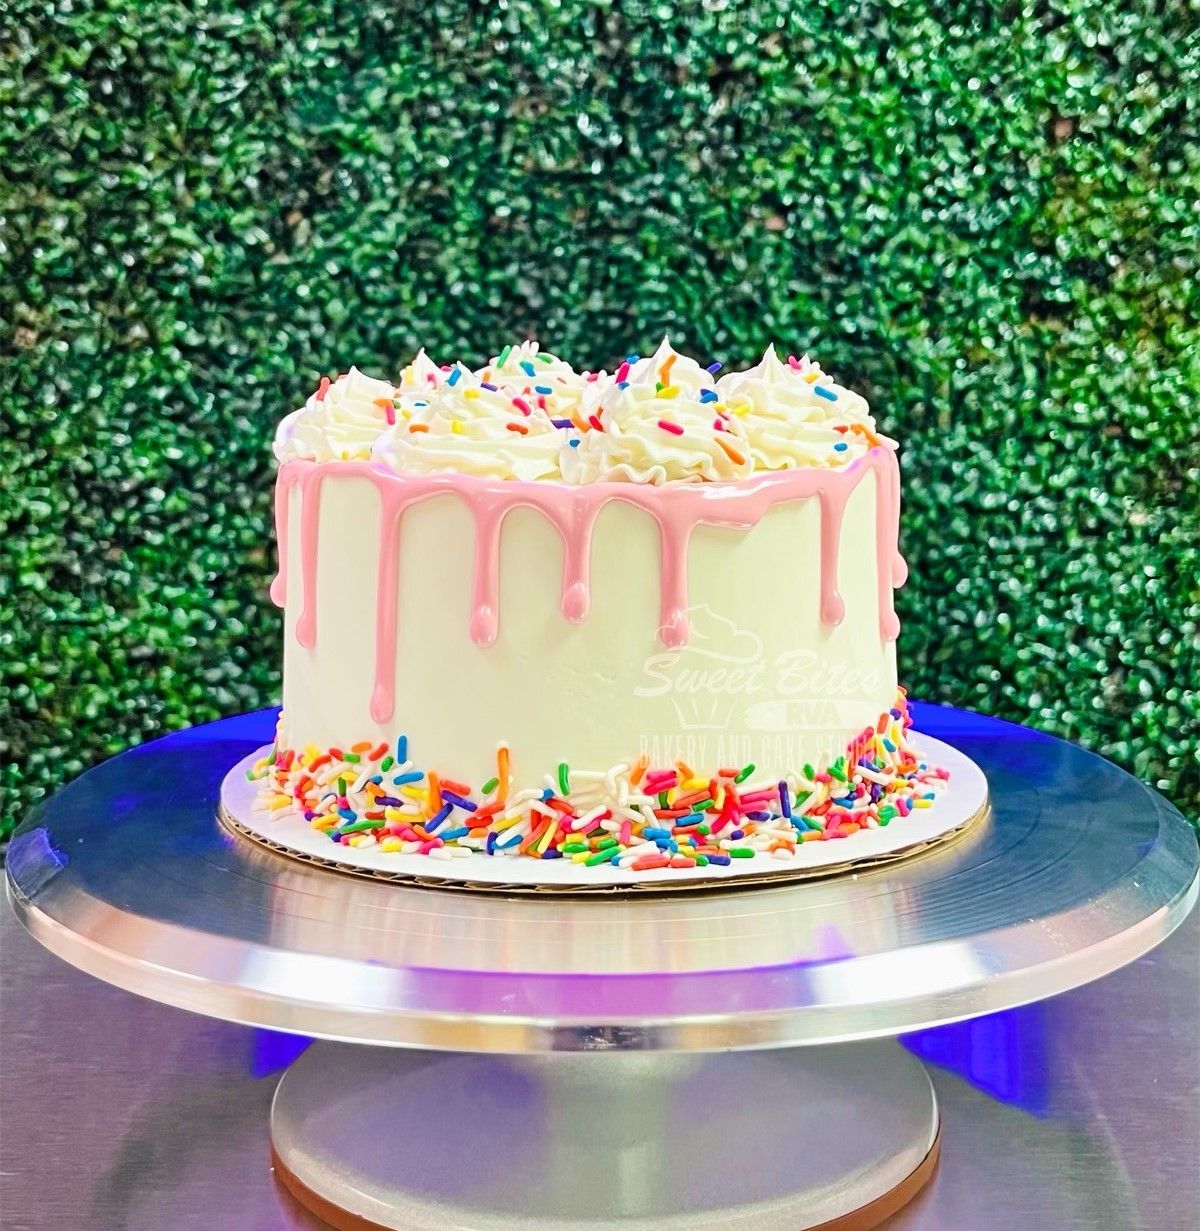 DIY Cake Class - Classic Drip Cake (Ages 13 & Up)